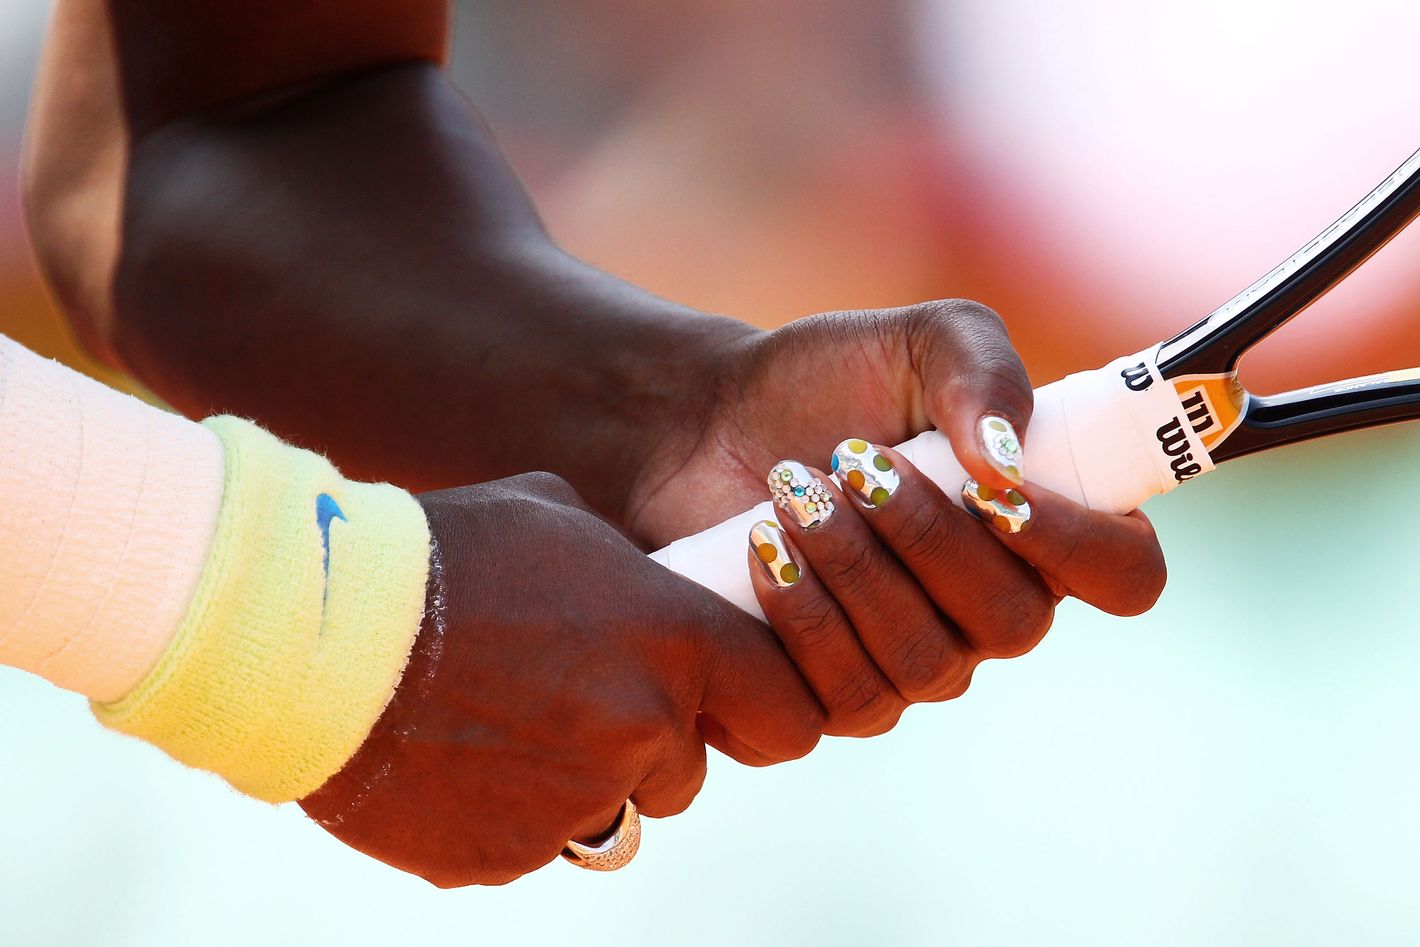 Serena Williams is returning to the seaside - and the world will be watching